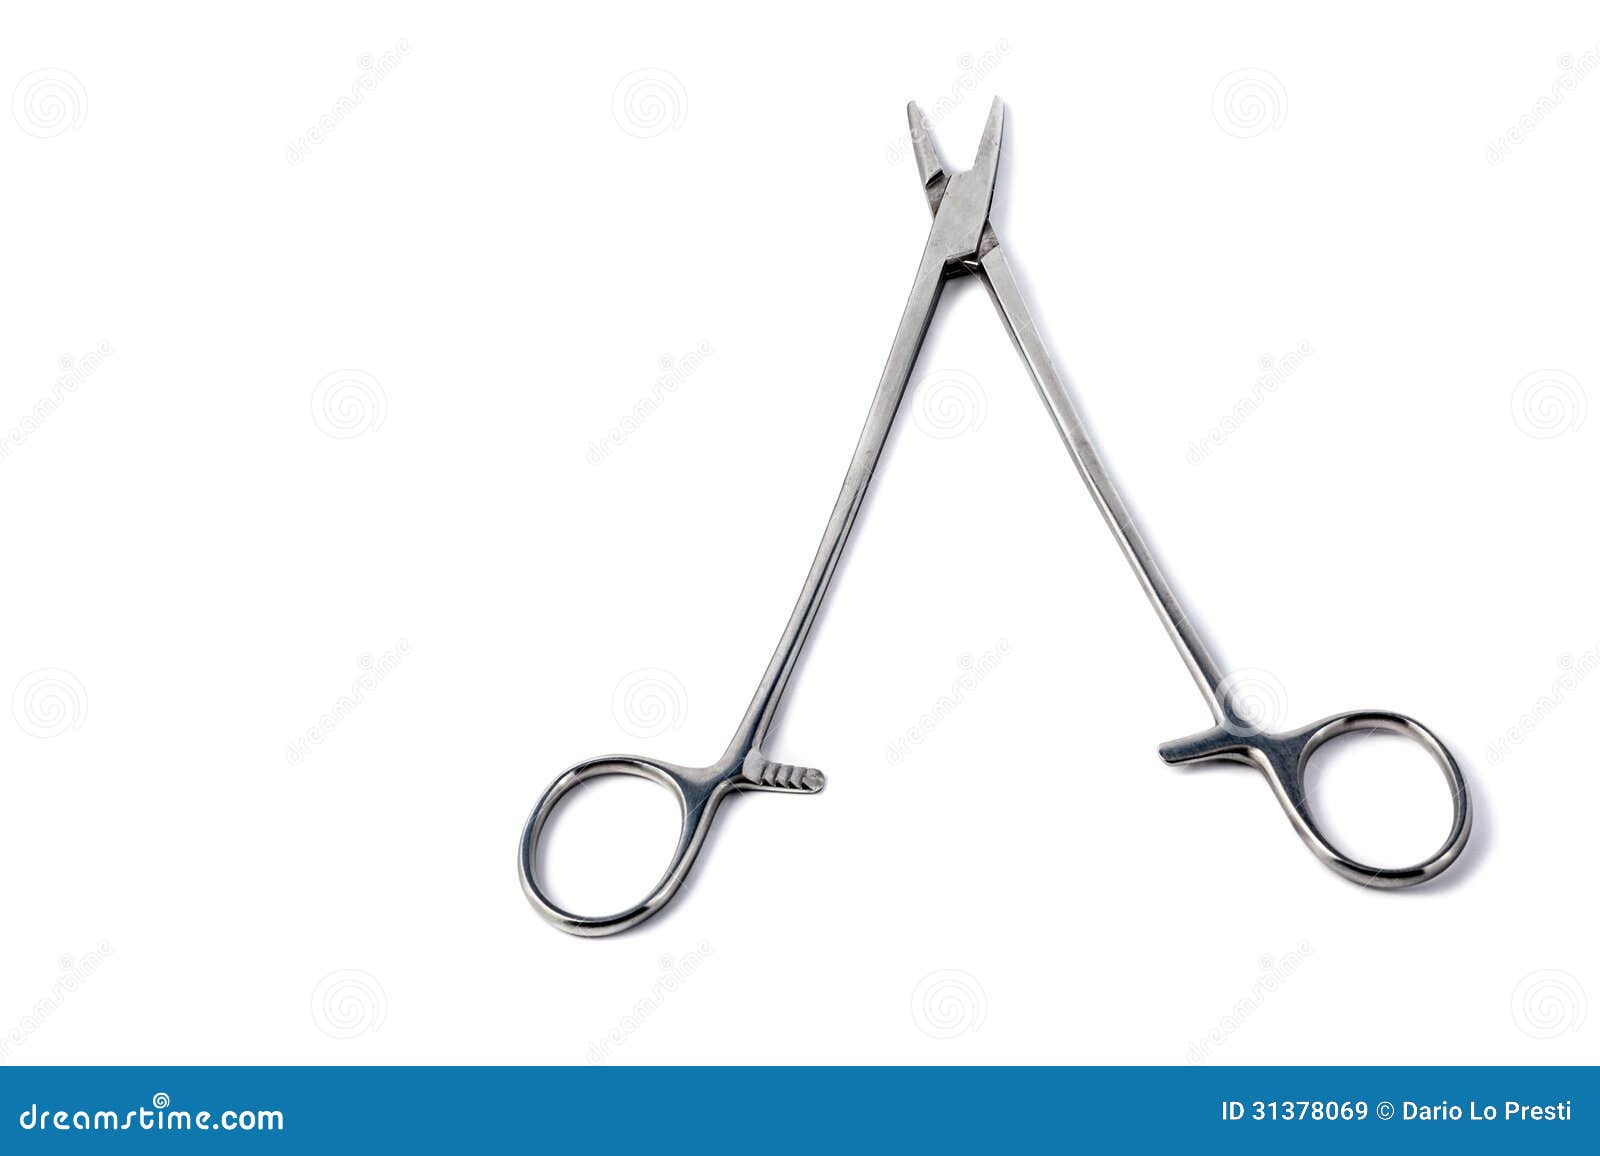 Open Surgical Clamps Royalty Free Stock Images - Image: 31378069